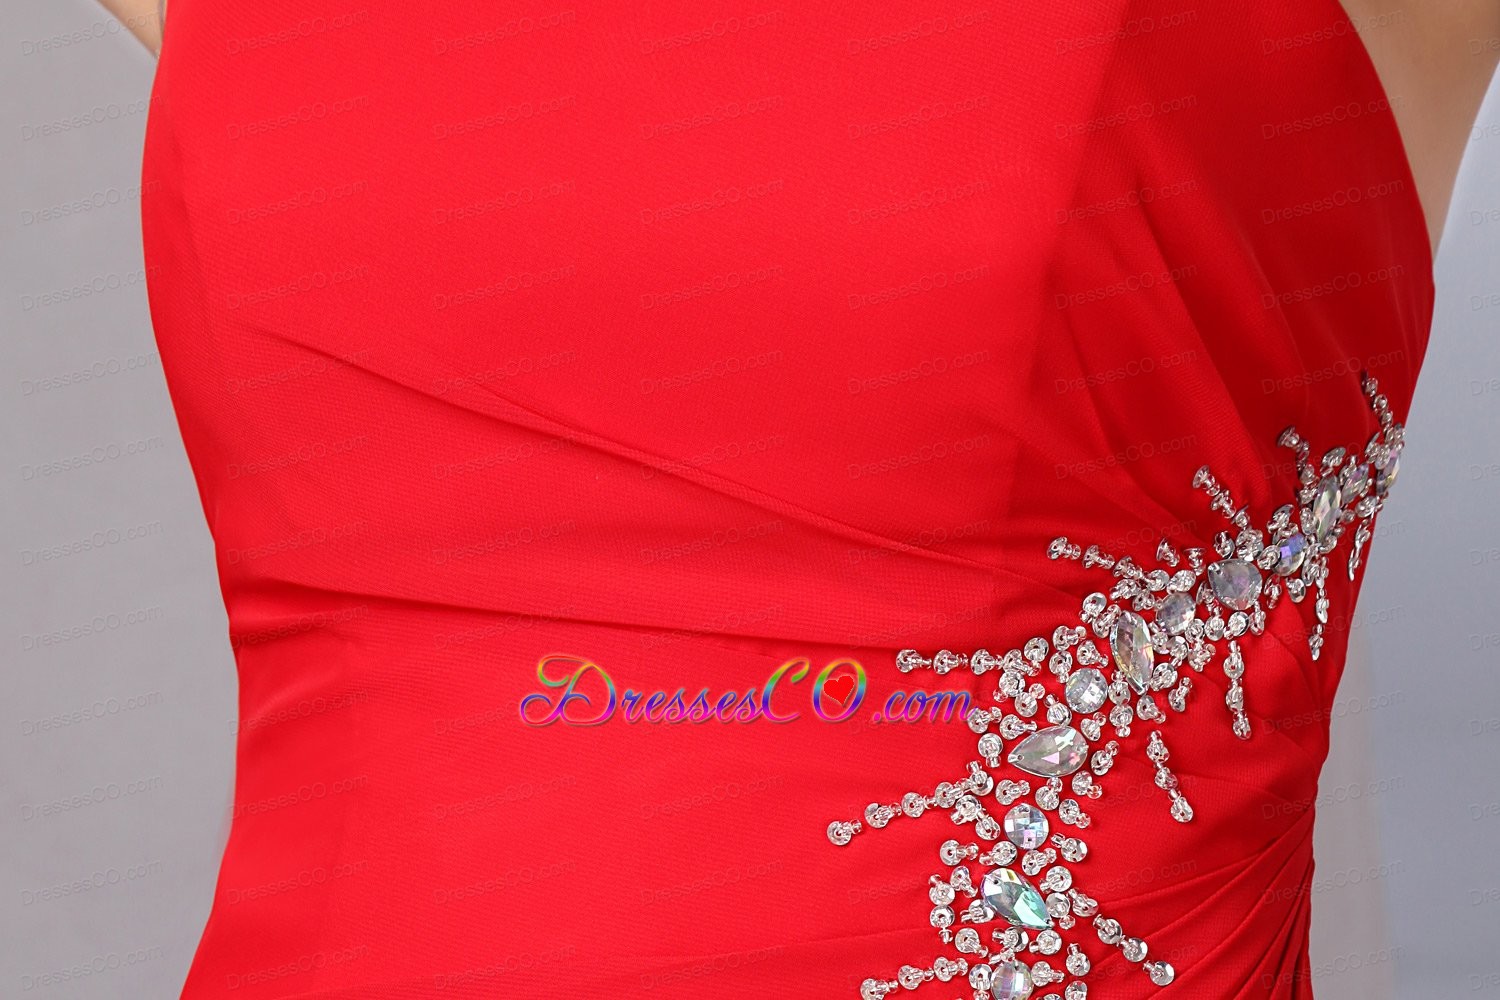 Beautiful Red One Shoulder Chiffon Prom Dress With Silver Beading On Top Side